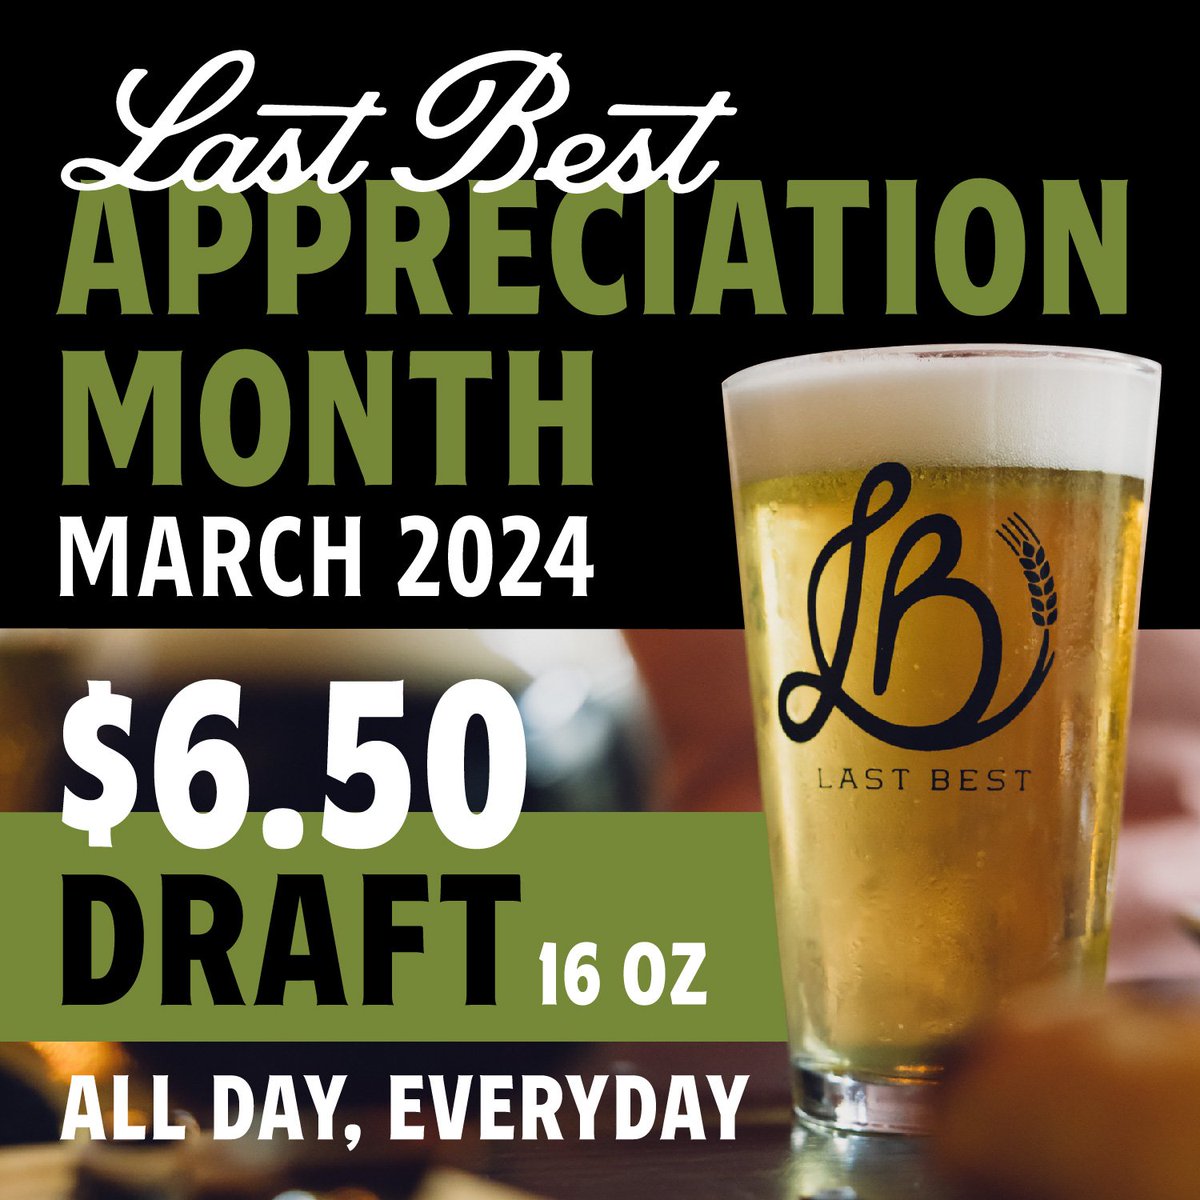 Thank y'all for supporting us over the years! Join us throughout March for $6.50 brewer's selected beers as a token of our appreciation.